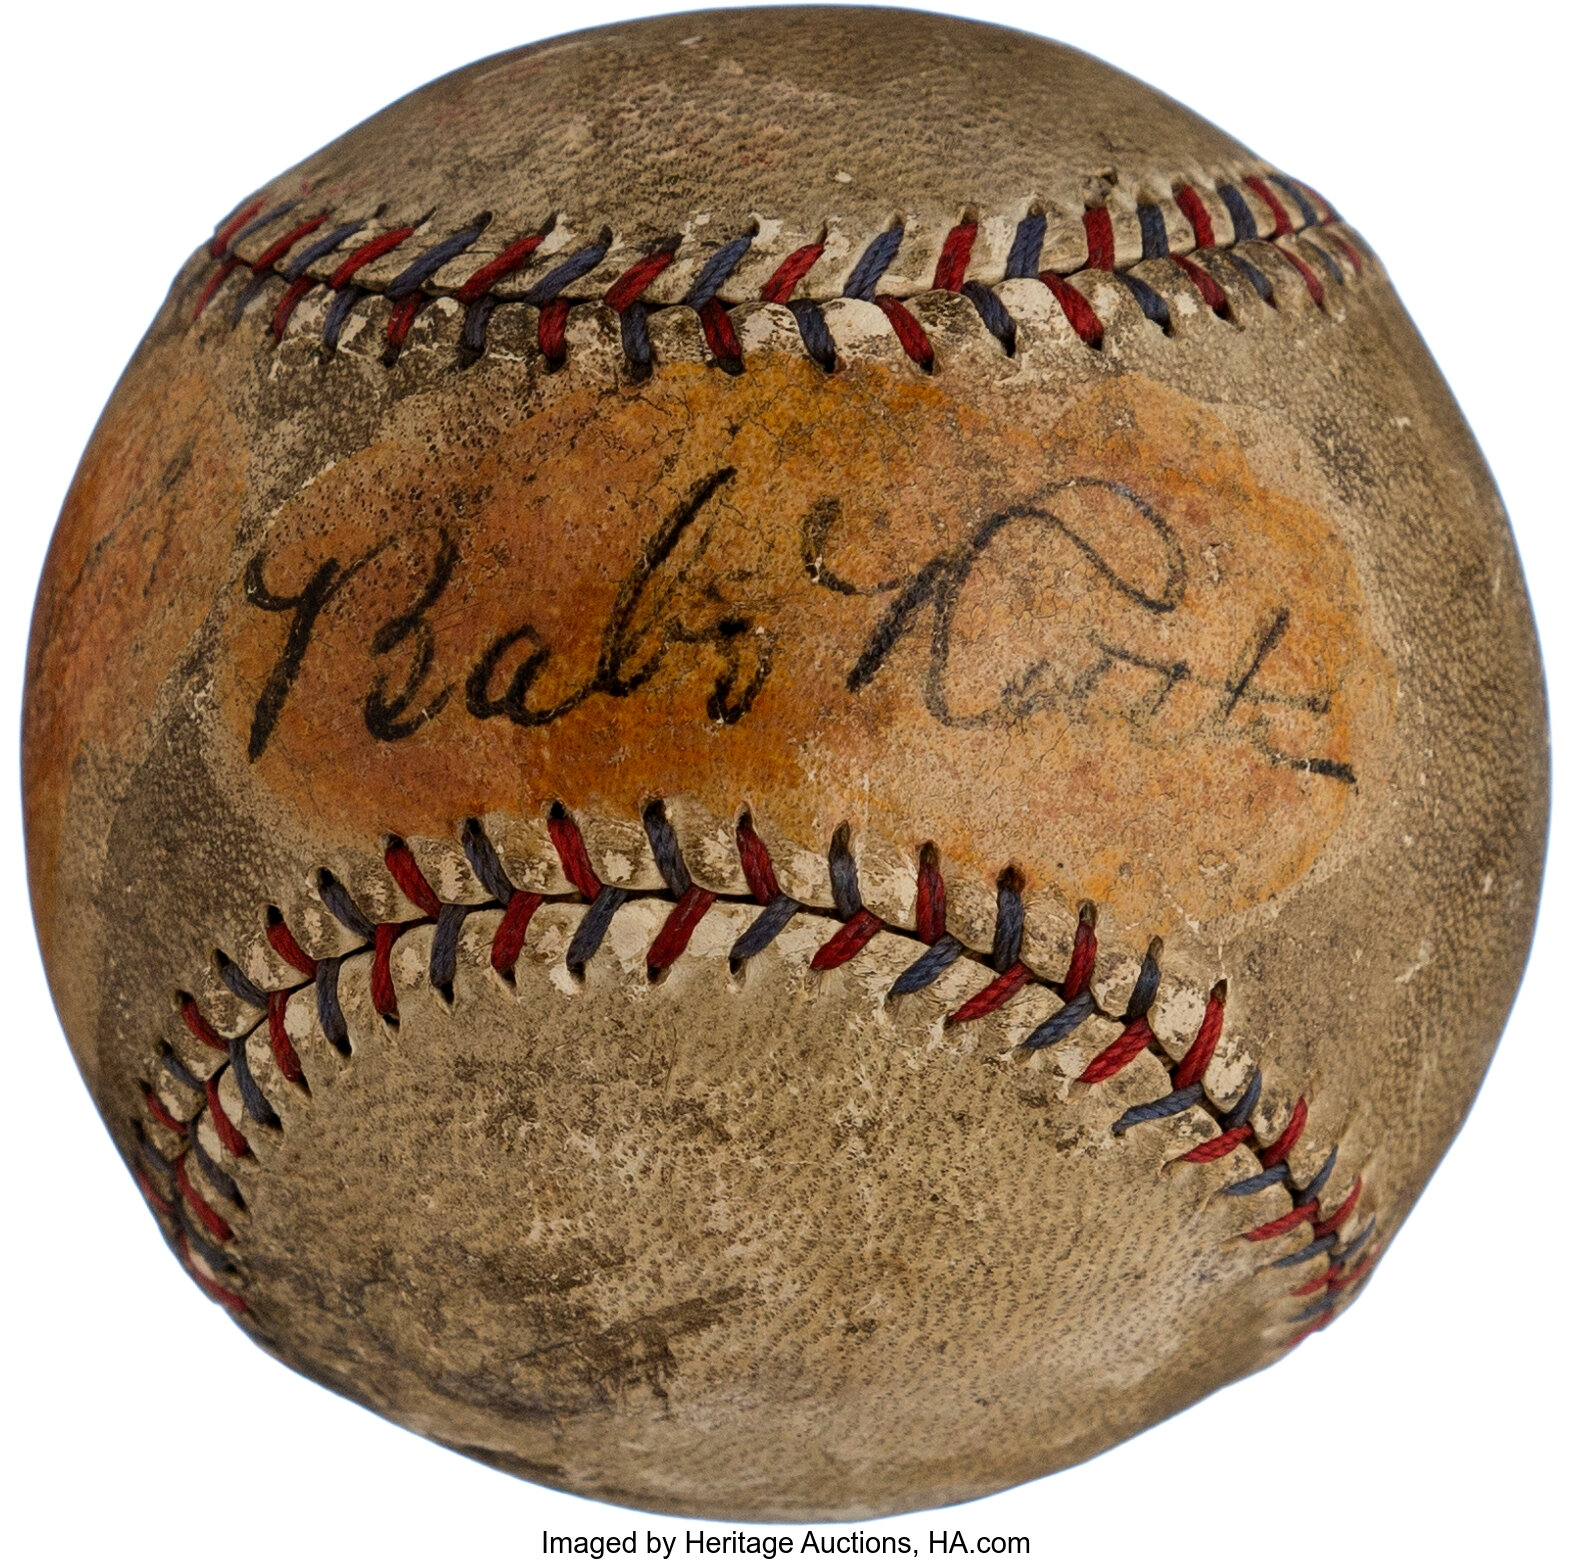 Dual Signed Ruth-Gehrig Ball Tops Auction